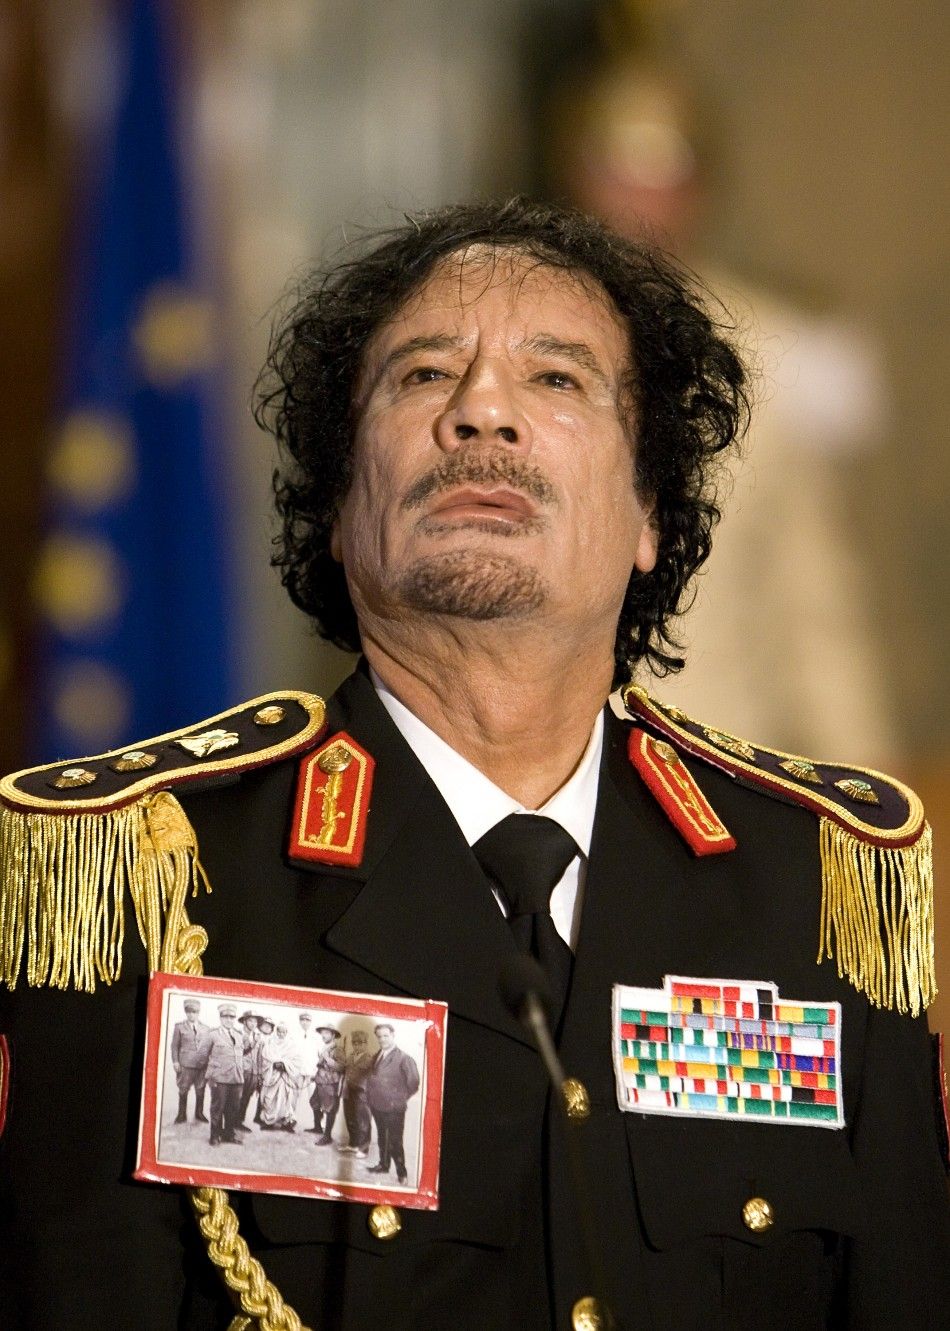 Muammar Gaddafi looks on during a news conference at the Quirinale palace in Rome 2009